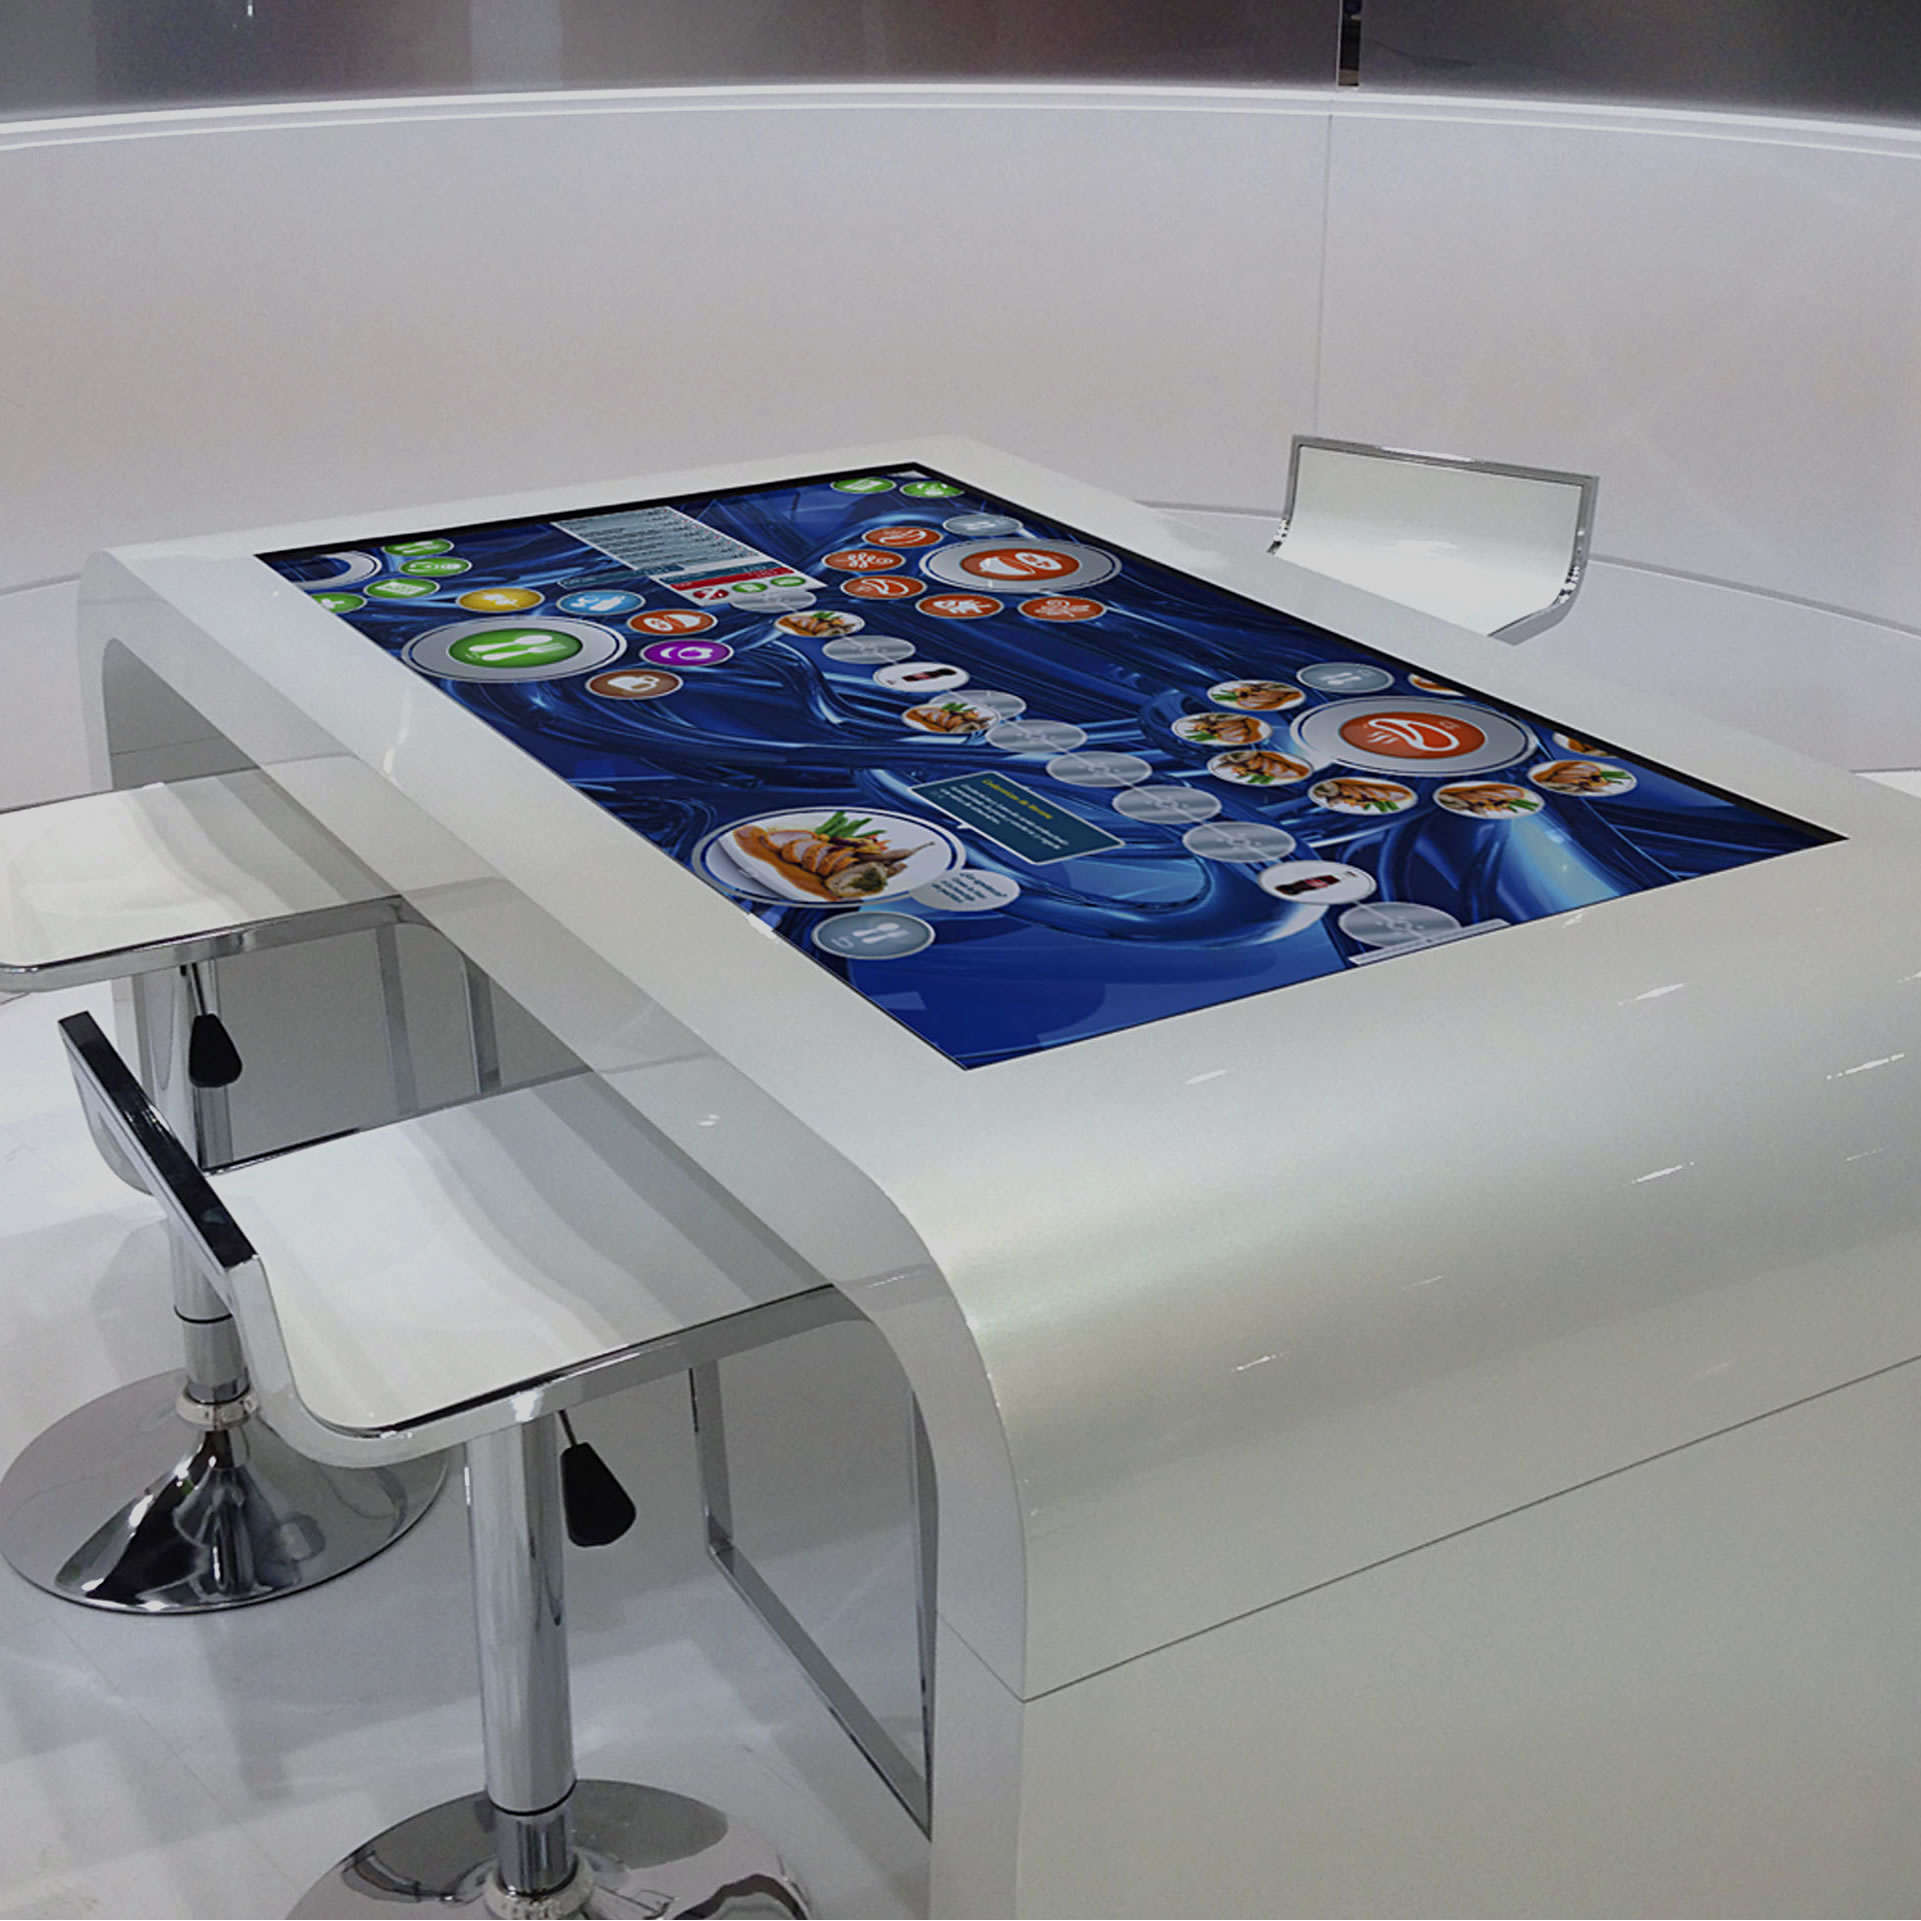 XTable Multitouch table made in Barcelona